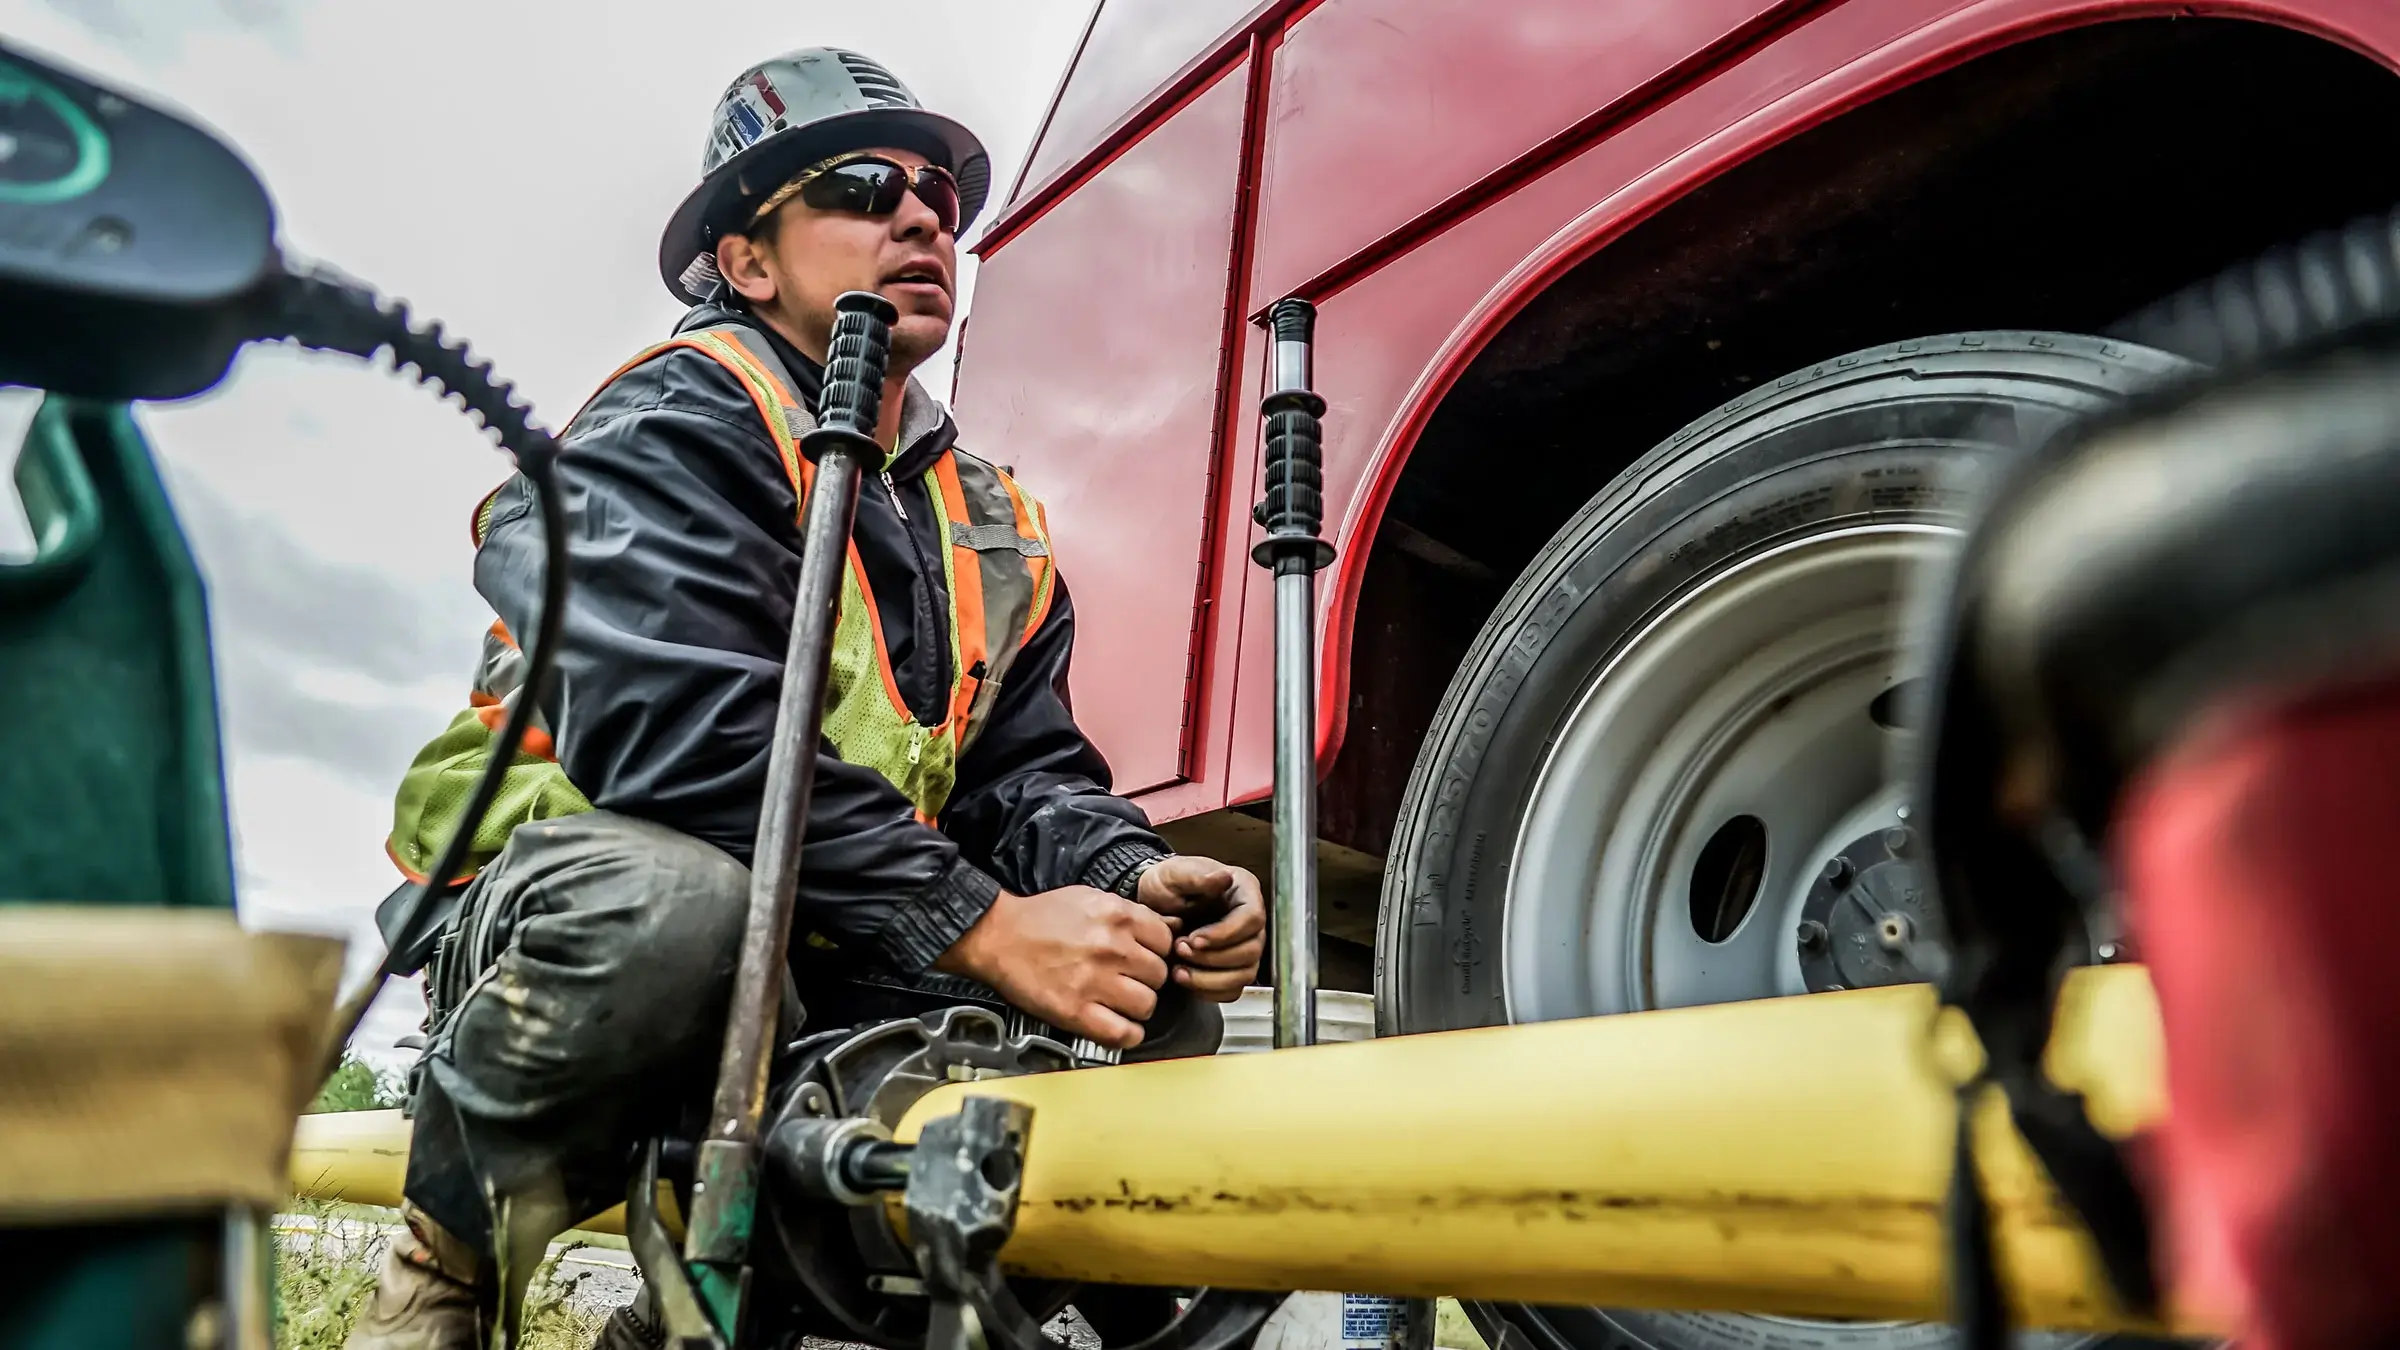 A crew member observes and inspects a small pipe near a truck